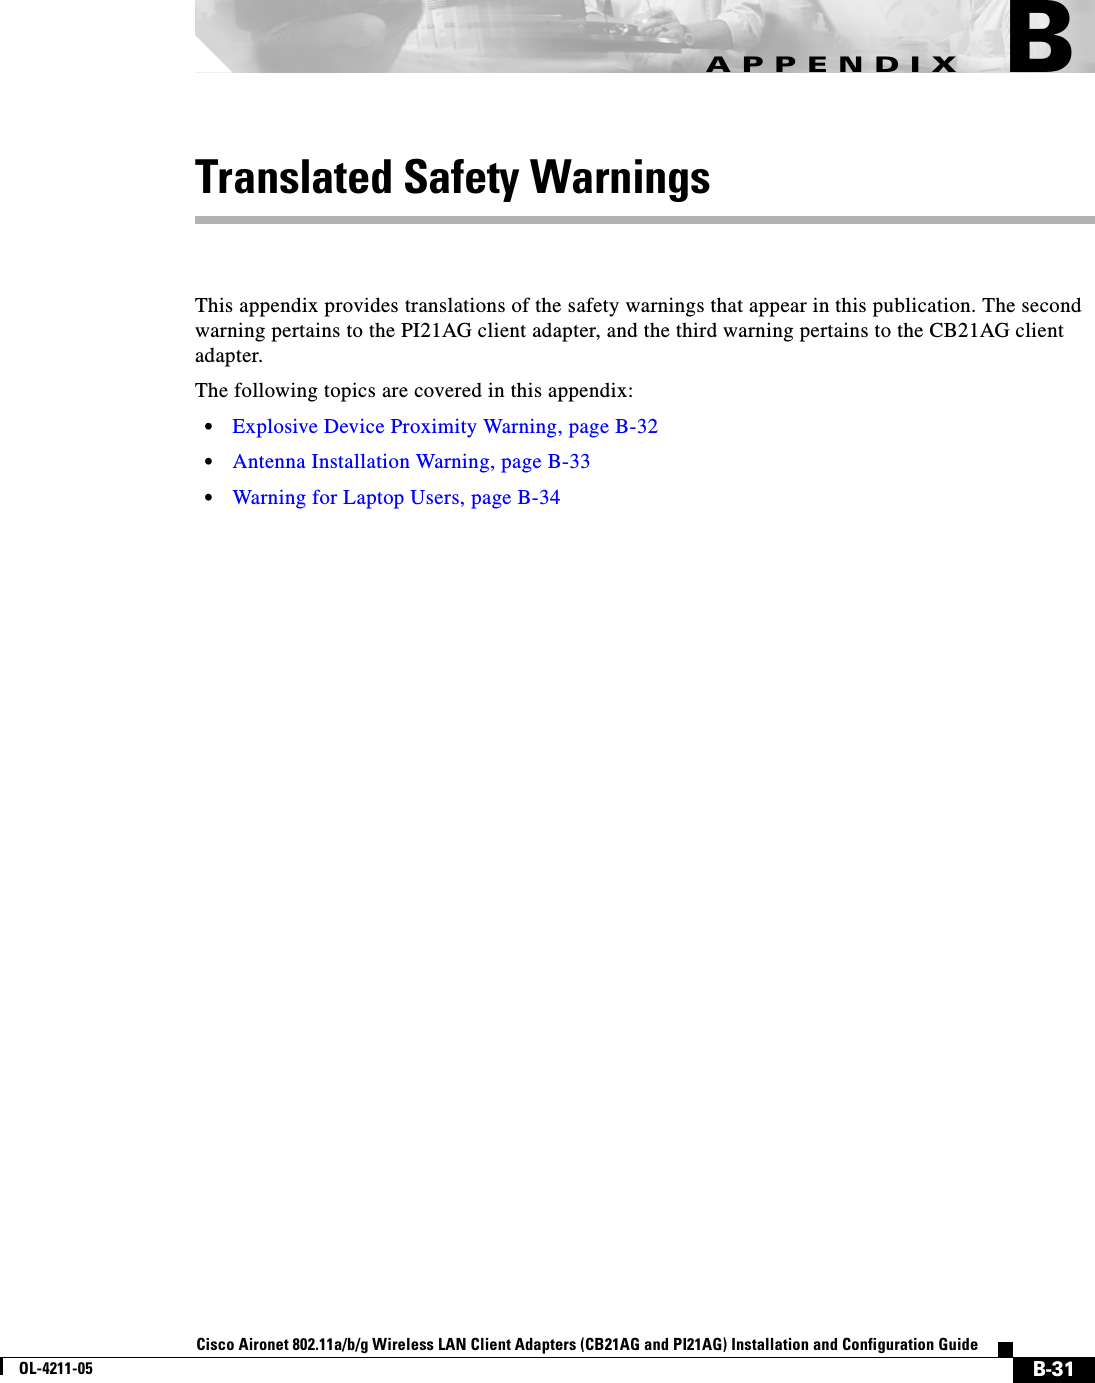 B-31Cisco Aironet 802.11a/b/g Wireless LAN Client Adapters (CB21AG and PI21AG) Installation and Configuration GuideOL-4211-05APPENDIXBTranslated Safety WarningsThis appendix provides translations of the safety warnings that appear in this publication. The second warning pertains to the PI21AG client adapter, and the third warning pertains to the CB21AG client adapter.The following topics are covered in this appendix:•Explosive Device Proximity Warning, page B-32•Antenna Installation Warning, page B-33•Warning for Laptop Users, page B-34